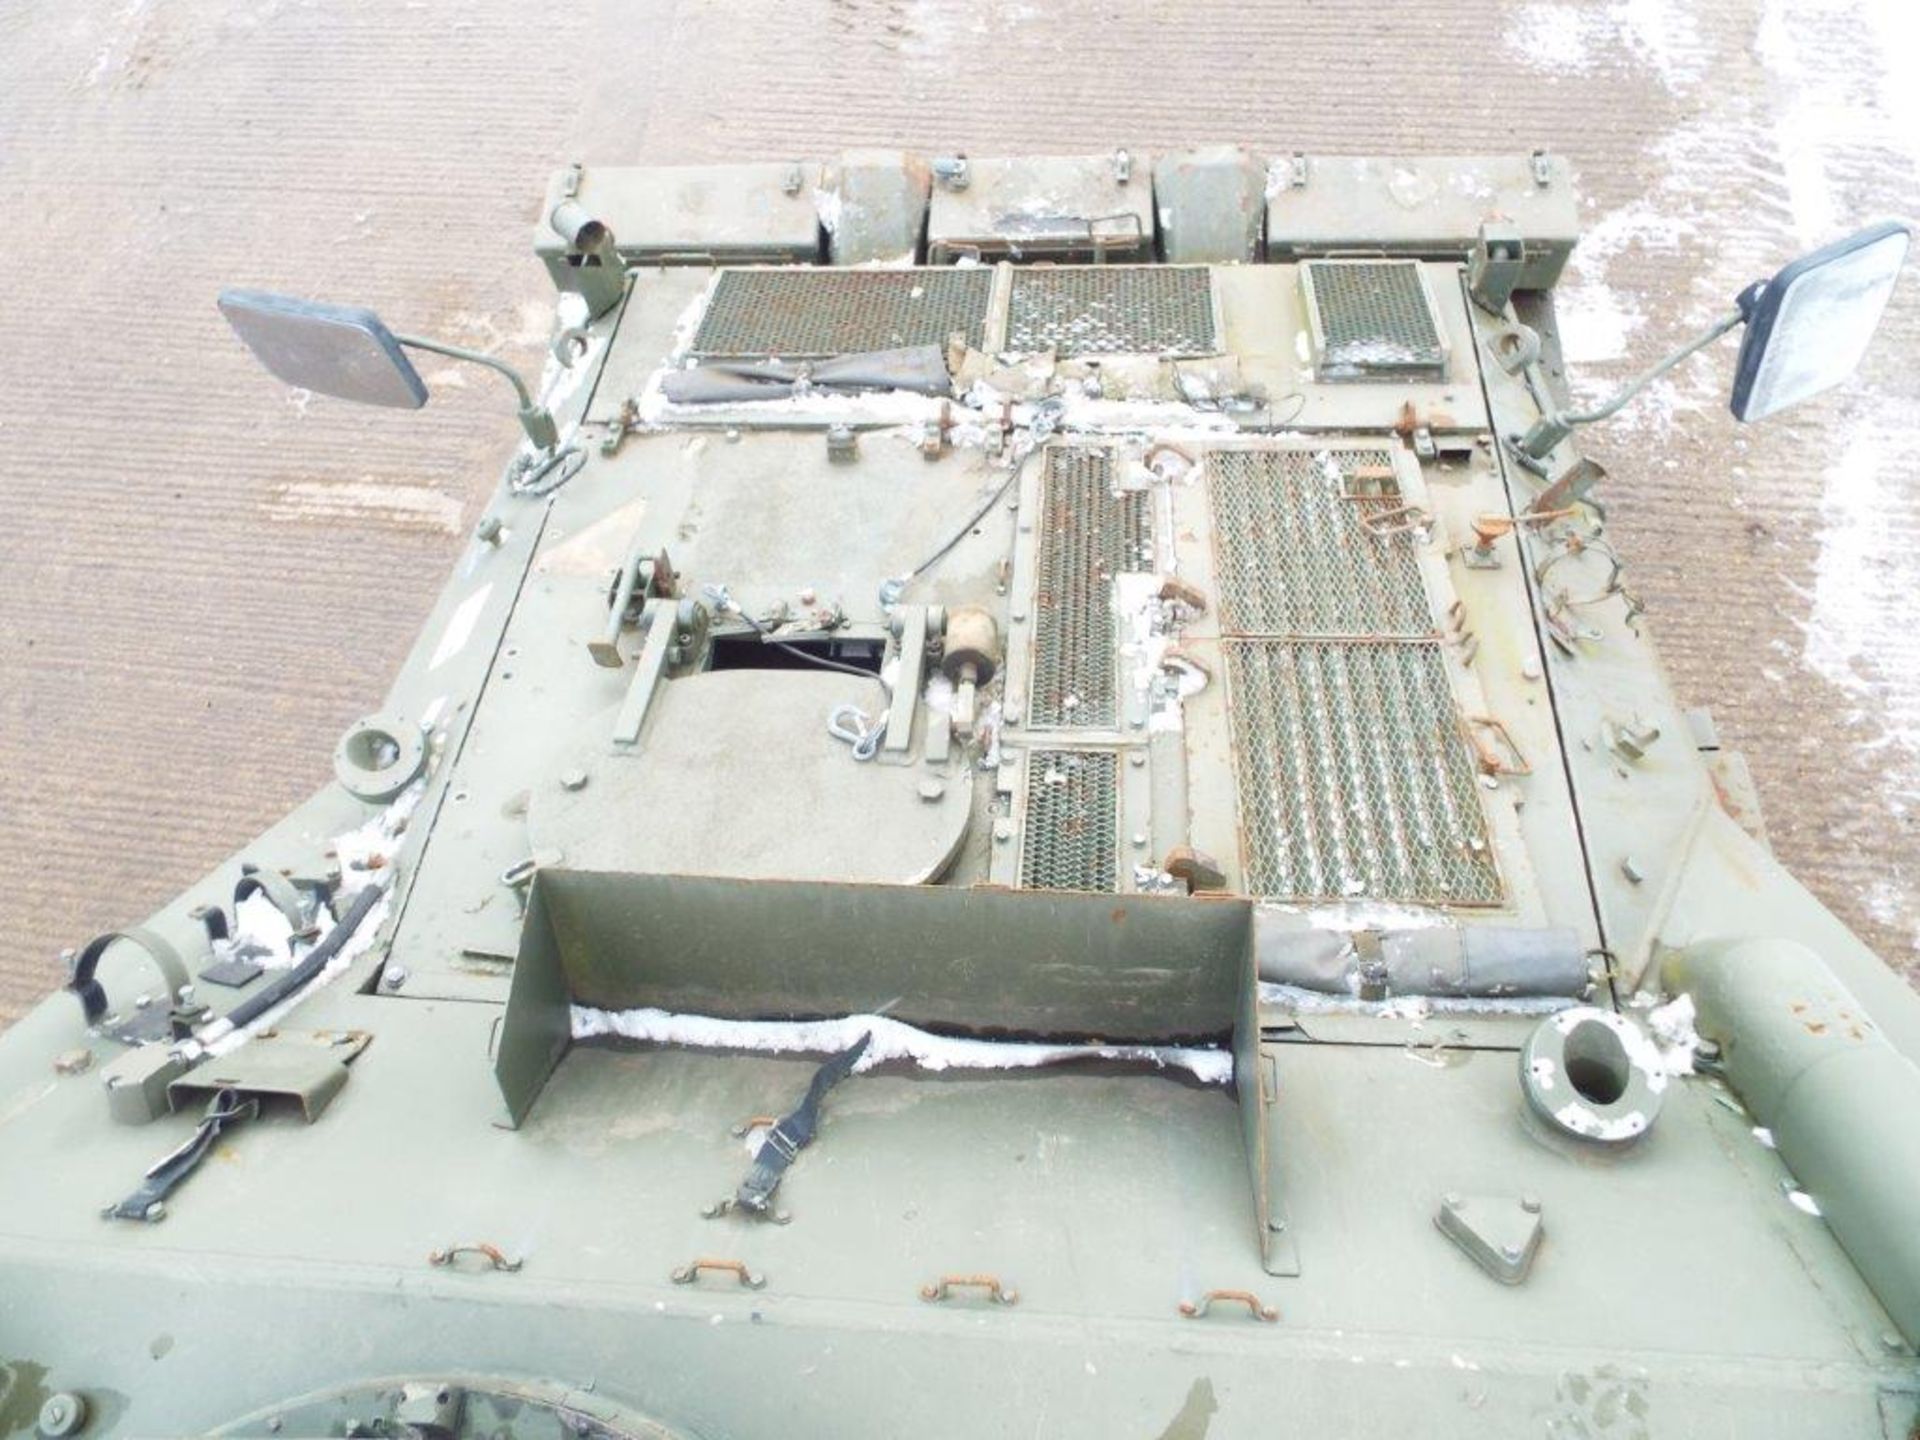 Dieselised CVRT FV105 Sultan Armoured Personnel Carrier with David Brown TN15e Gearbox - Image 11 of 26